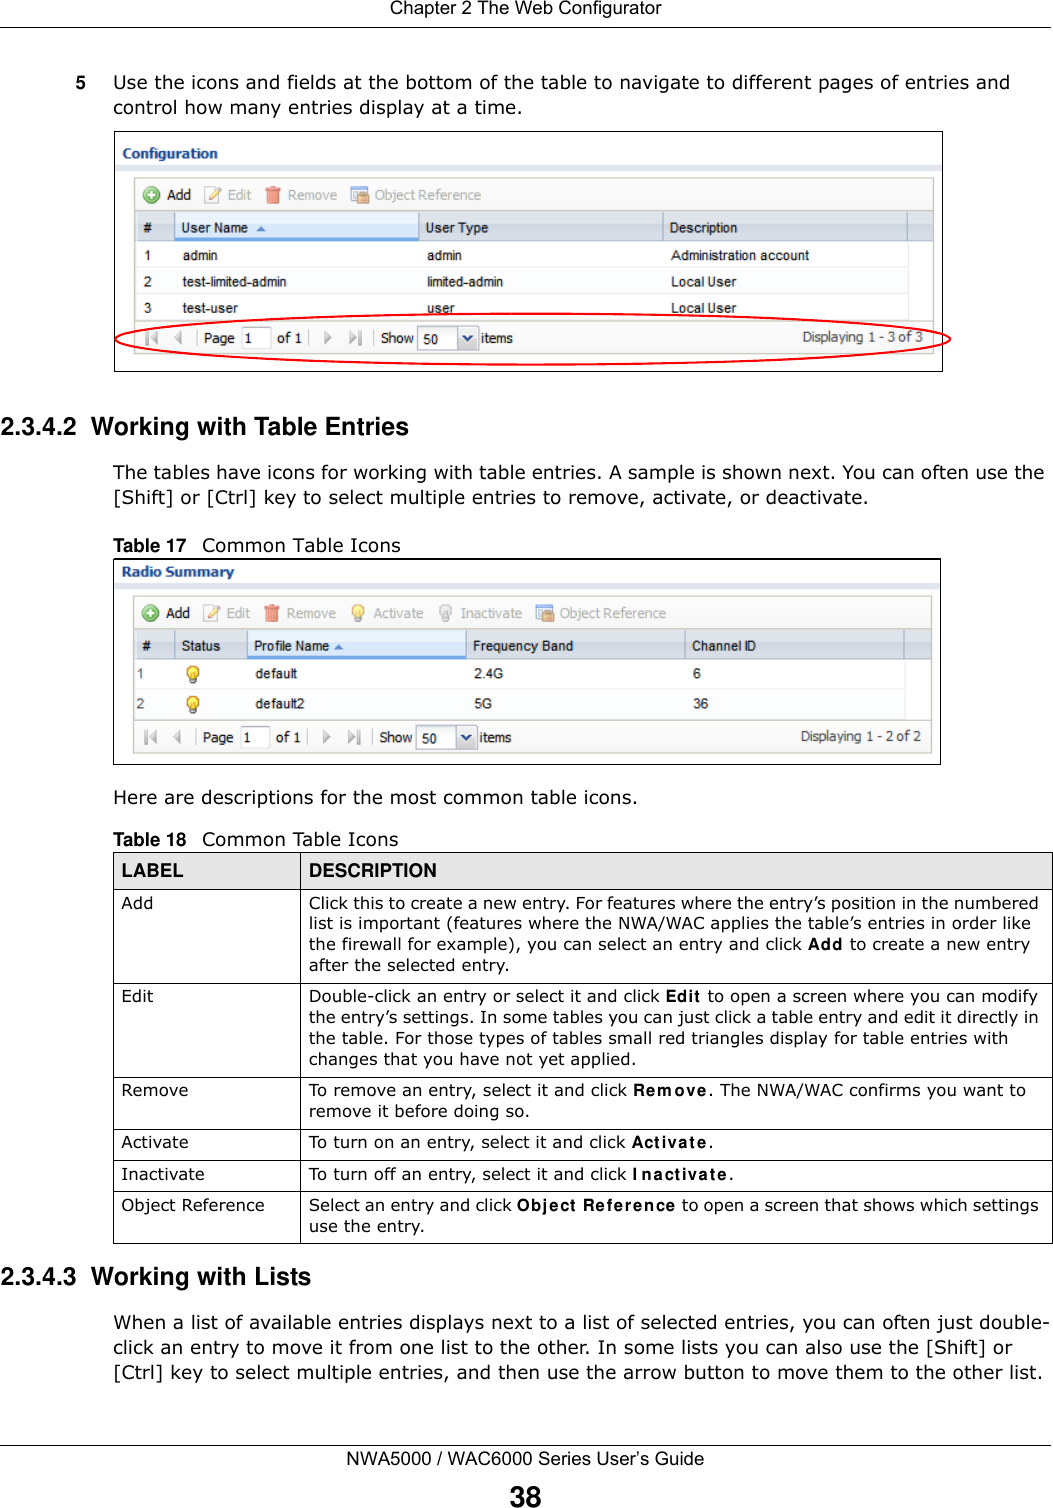 Chapter 2 The Web ConfiguratorNWA5000 / WAC6000 Series User’s Guide385Use the icons and fields at the bottom of the table to navigate to different pages of entries and control how many entries display at a time. 2.3.4.2  Working with Table EntriesThe tables have icons for working with table entries. A sample is shown next. You can often use the [Shift] or [Ctrl] key to select multiple entries to remove, activate, or deactivate. Table 17   Common Table IconsHere are descriptions for the most common table icons.2.3.4.3  Working with ListsWhen a list of available entries displays next to a list of selected entries, you can often just double-click an entry to move it from one list to the other. In some lists you can also use the [Shift] or [Ctrl] key to select multiple entries, and then use the arrow button to move them to the other list. Table 18   Common Table IconsLABEL DESCRIPTIONAdd Click this to create a new entry. For features where the entry’s position in the numbered list is important (features where the NWA/WAC applies the table’s entries in order like the firewall for example), you can select an entry and click Add to create a new entry after the selected entry.Edit Double-click an entry or select it and click Edit to open a screen where you can modify the entry’s settings. In some tables you can just click a table entry and edit it directly in the table. For those types of tables small red triangles display for table entries with changes that you have not yet applied.Remove To remove an entry, select it and click Rem ove. The NWA/WAC confirms you want to remove it before doing so.Activate To turn on an entry, select it and click Act iv a t e.Inactivate To turn off an entry, select it and click I n a ct iva t e .Object Reference Select an entry and click Obj ect Refe r e nce to open a screen that shows which settings use the entry.